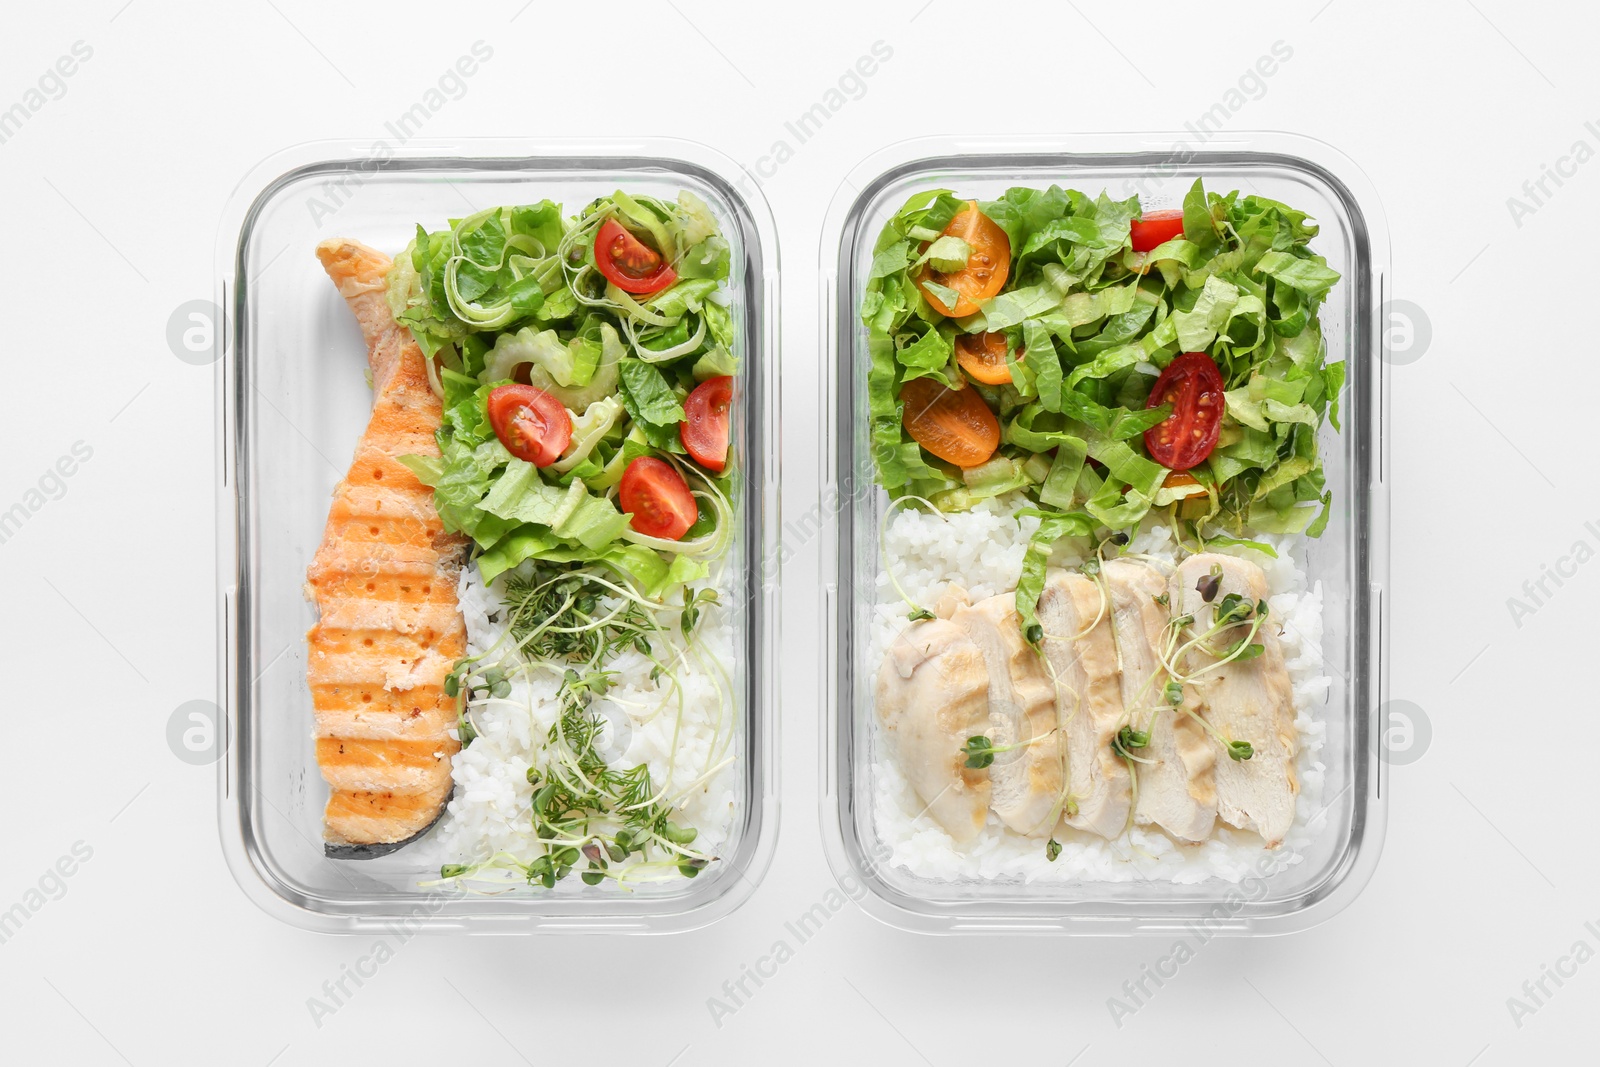 Photo of Healthy food. Different meals in glass containers on white background, top view